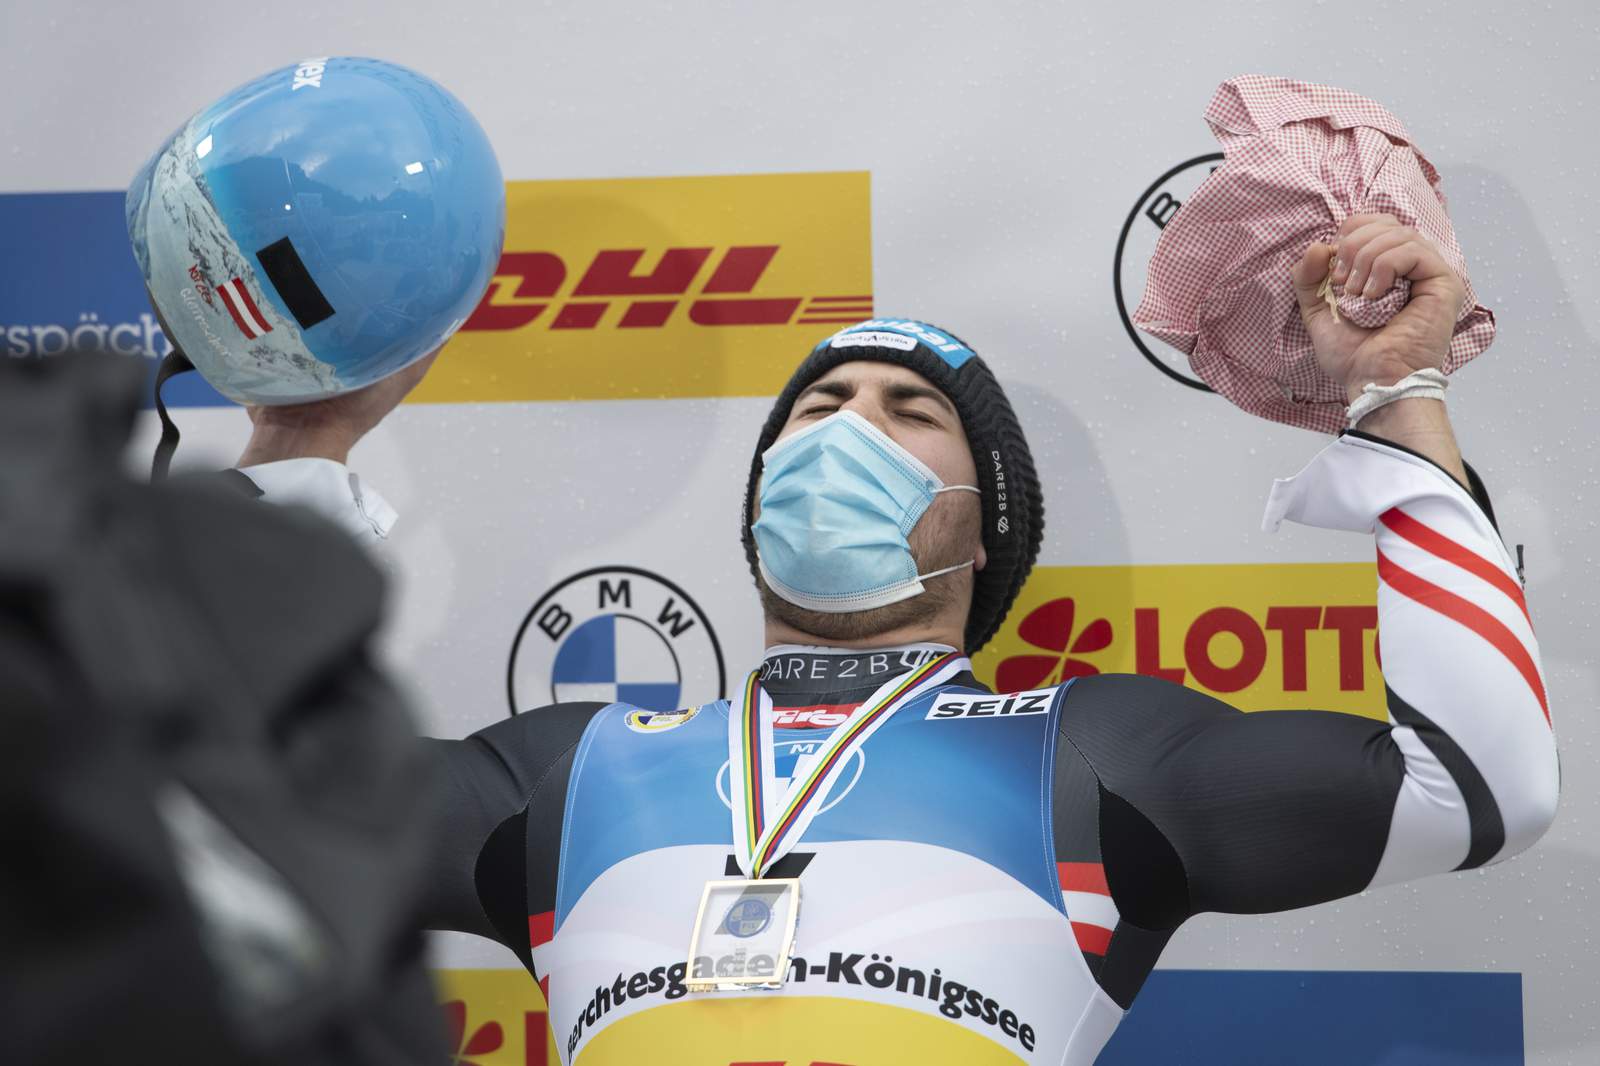 Host Germany wins 5 medals on 1st day of luge worlds